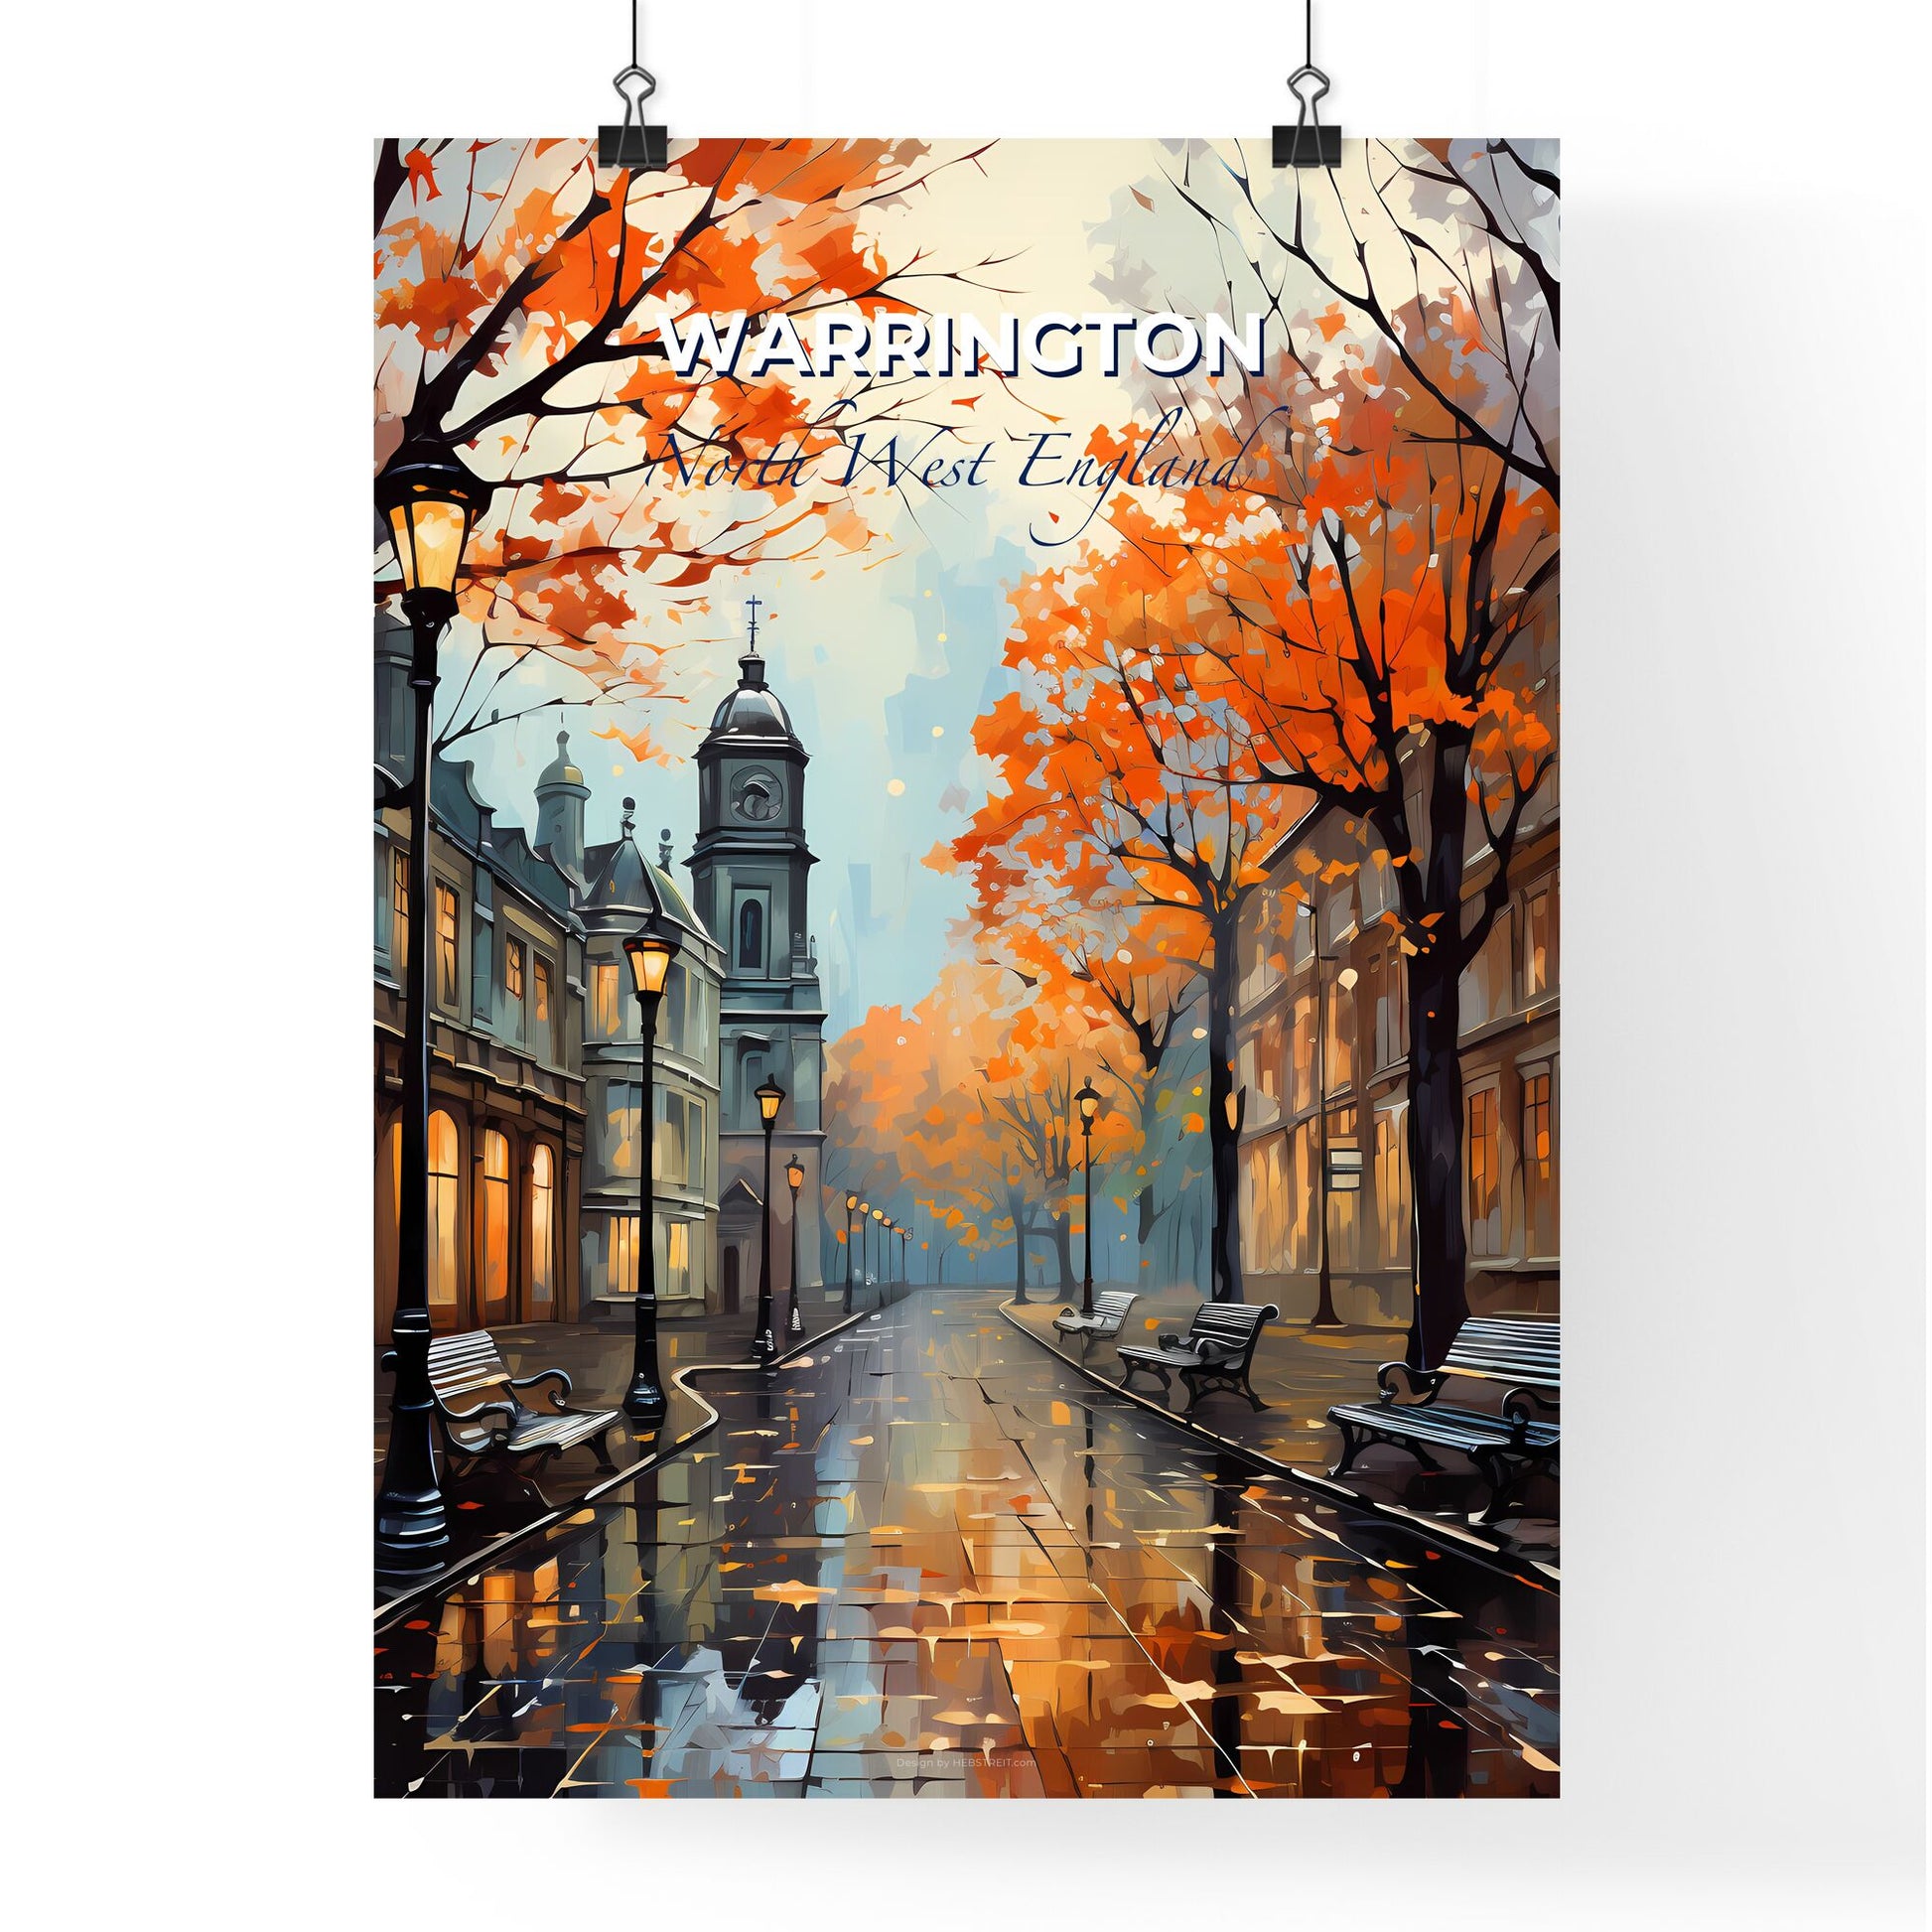 Warrington, North West England, A Poster of a street with benches and trees in front of a clock tower Default Title